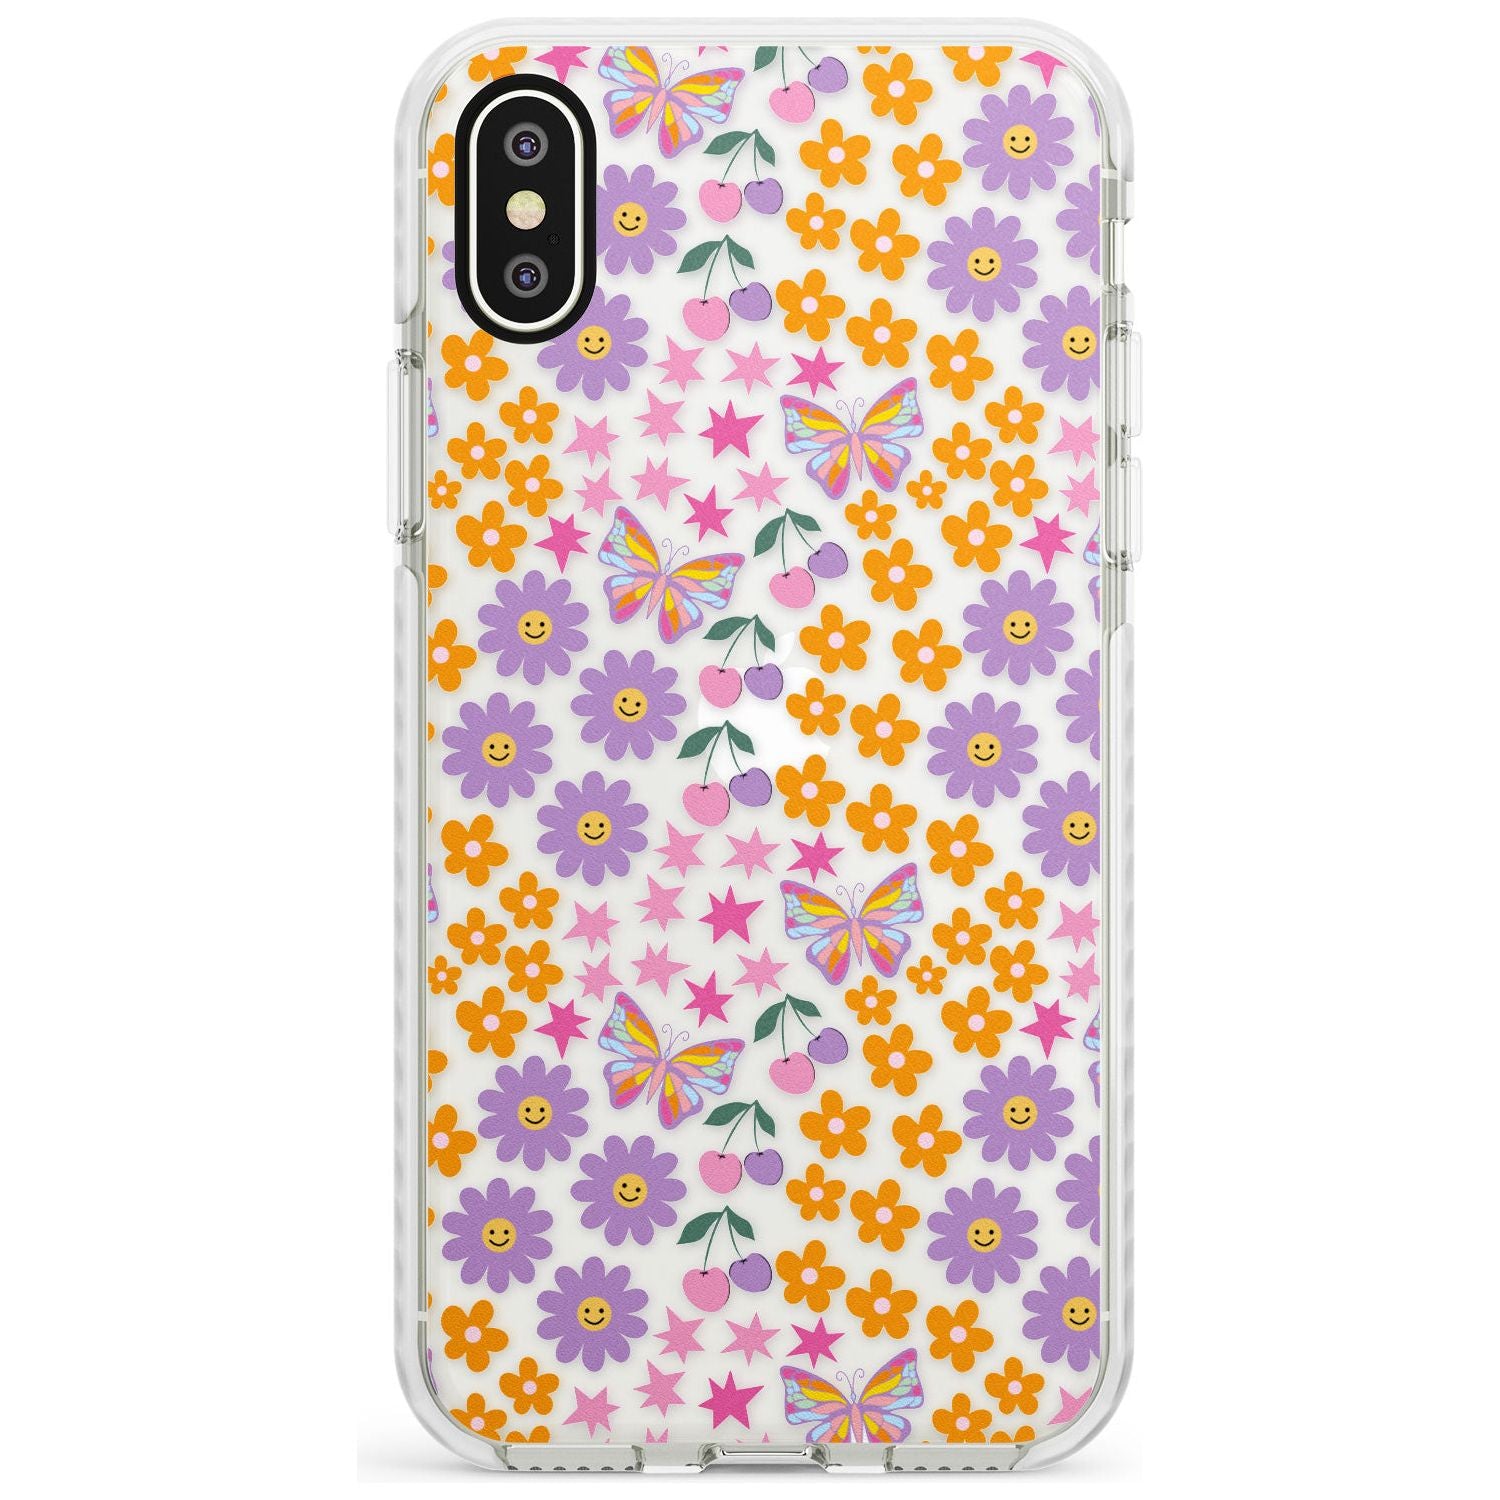 Botanical Bombardment Impact Phone Case for iPhone X XS Max XR